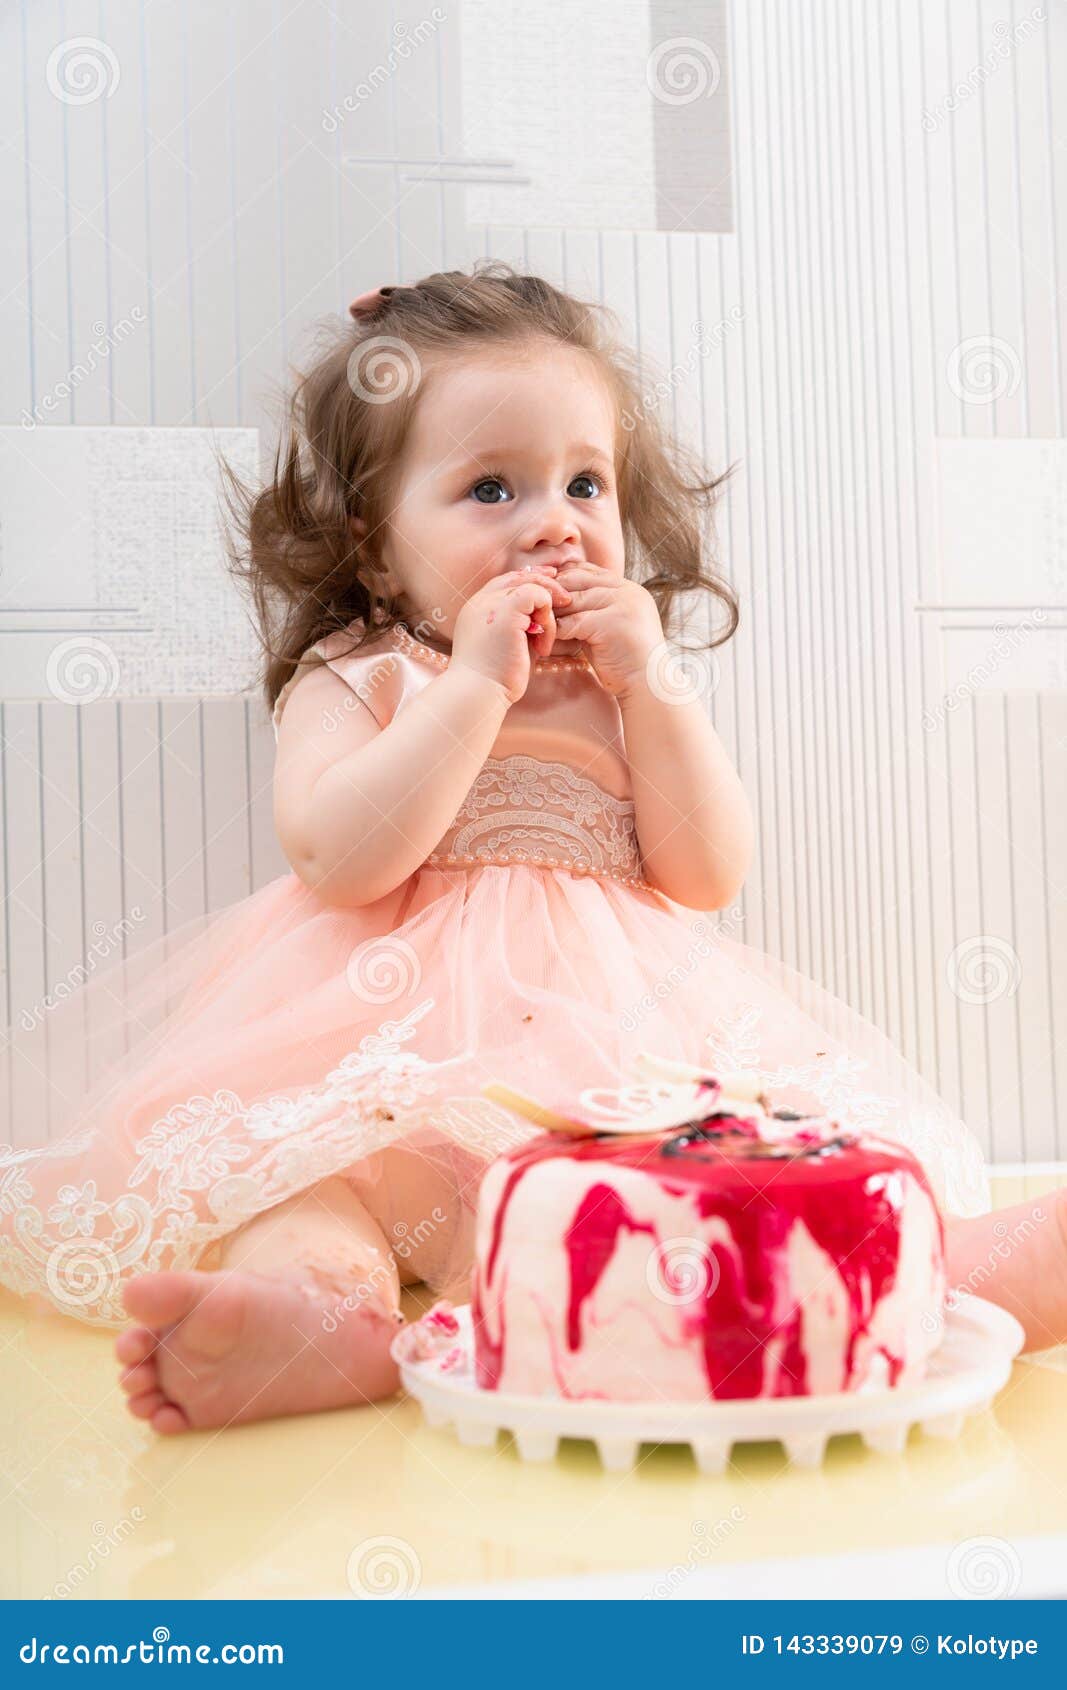 Young Baby Girl Eating Sweet Cake with Hands Stock Image - Image ...